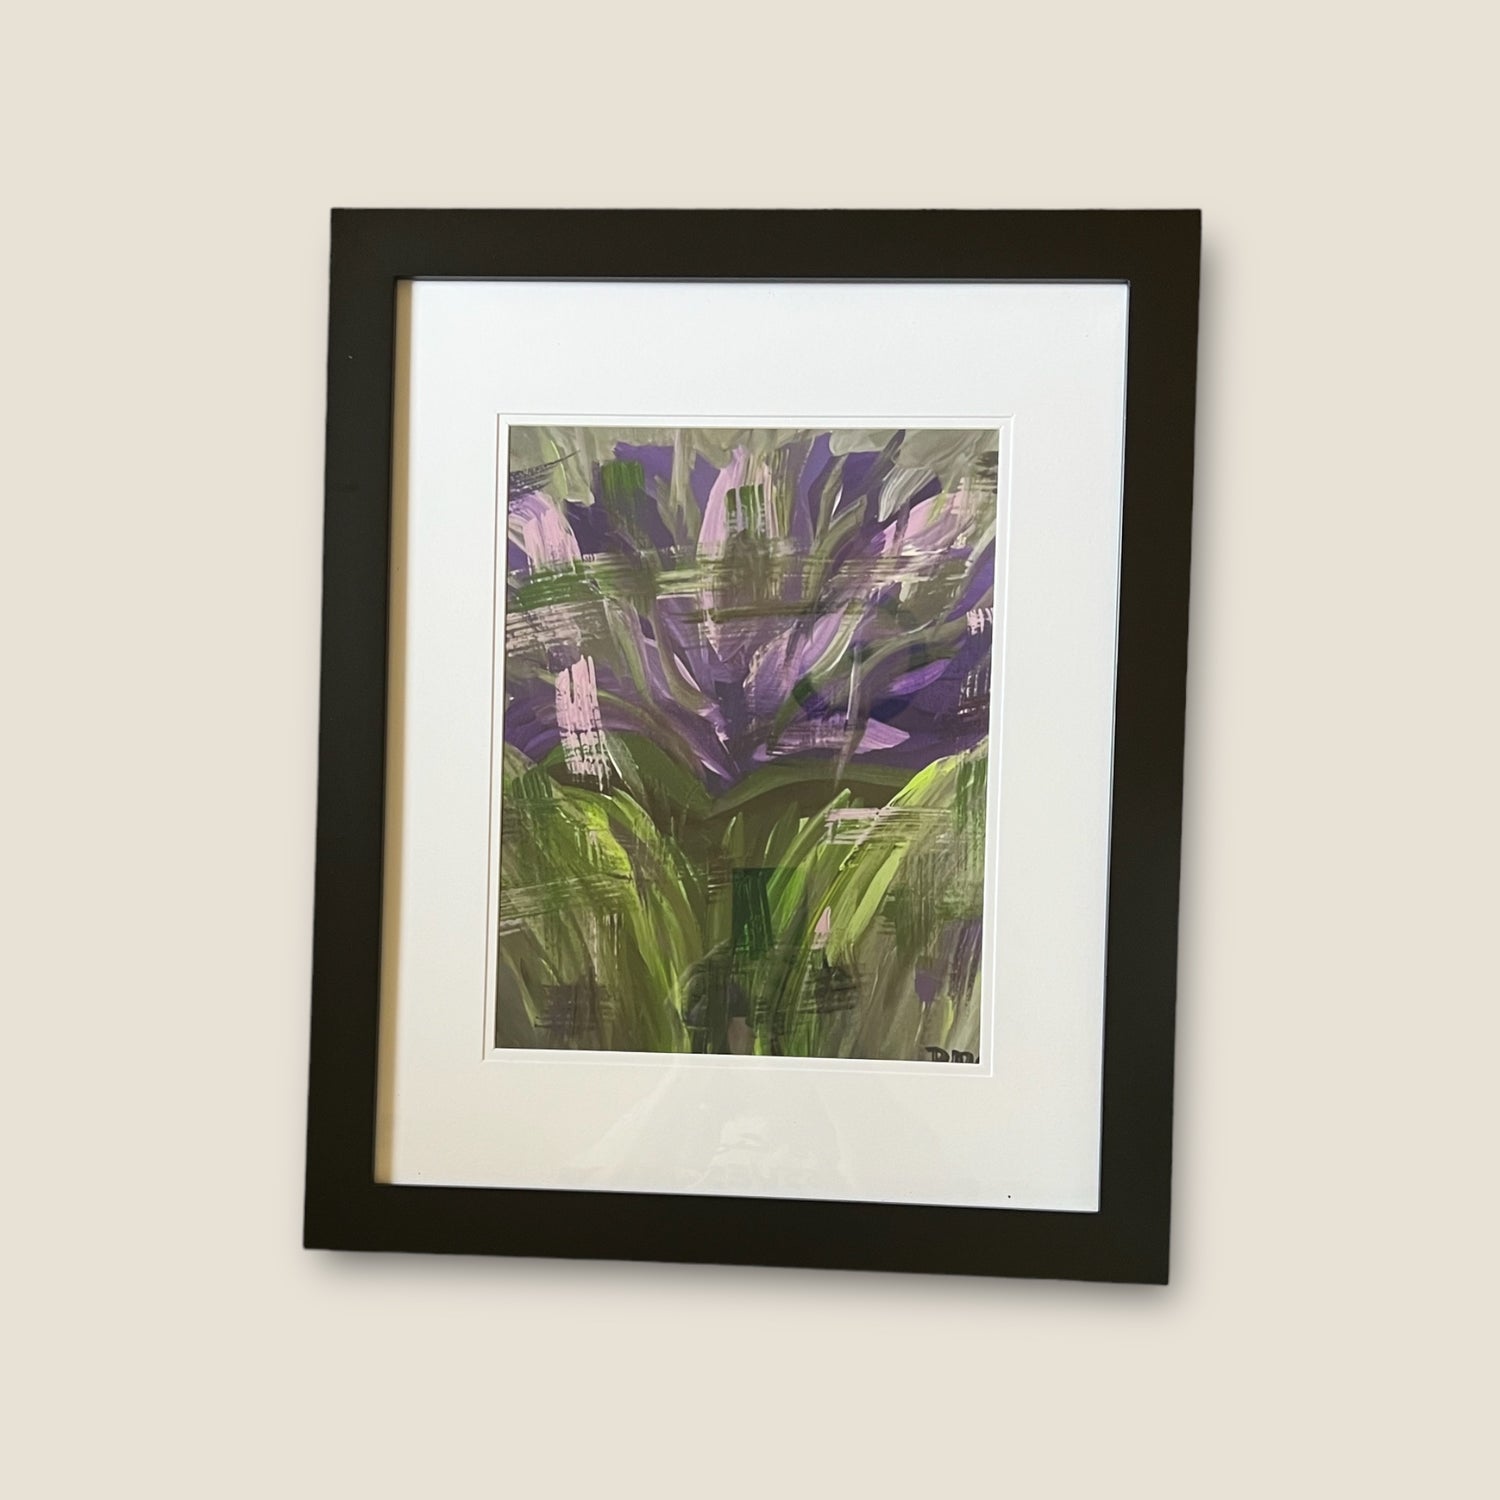 "Amethyst Iris" 11"x17" Gallery Poster Framed and Matted to 18.5"x22.5"